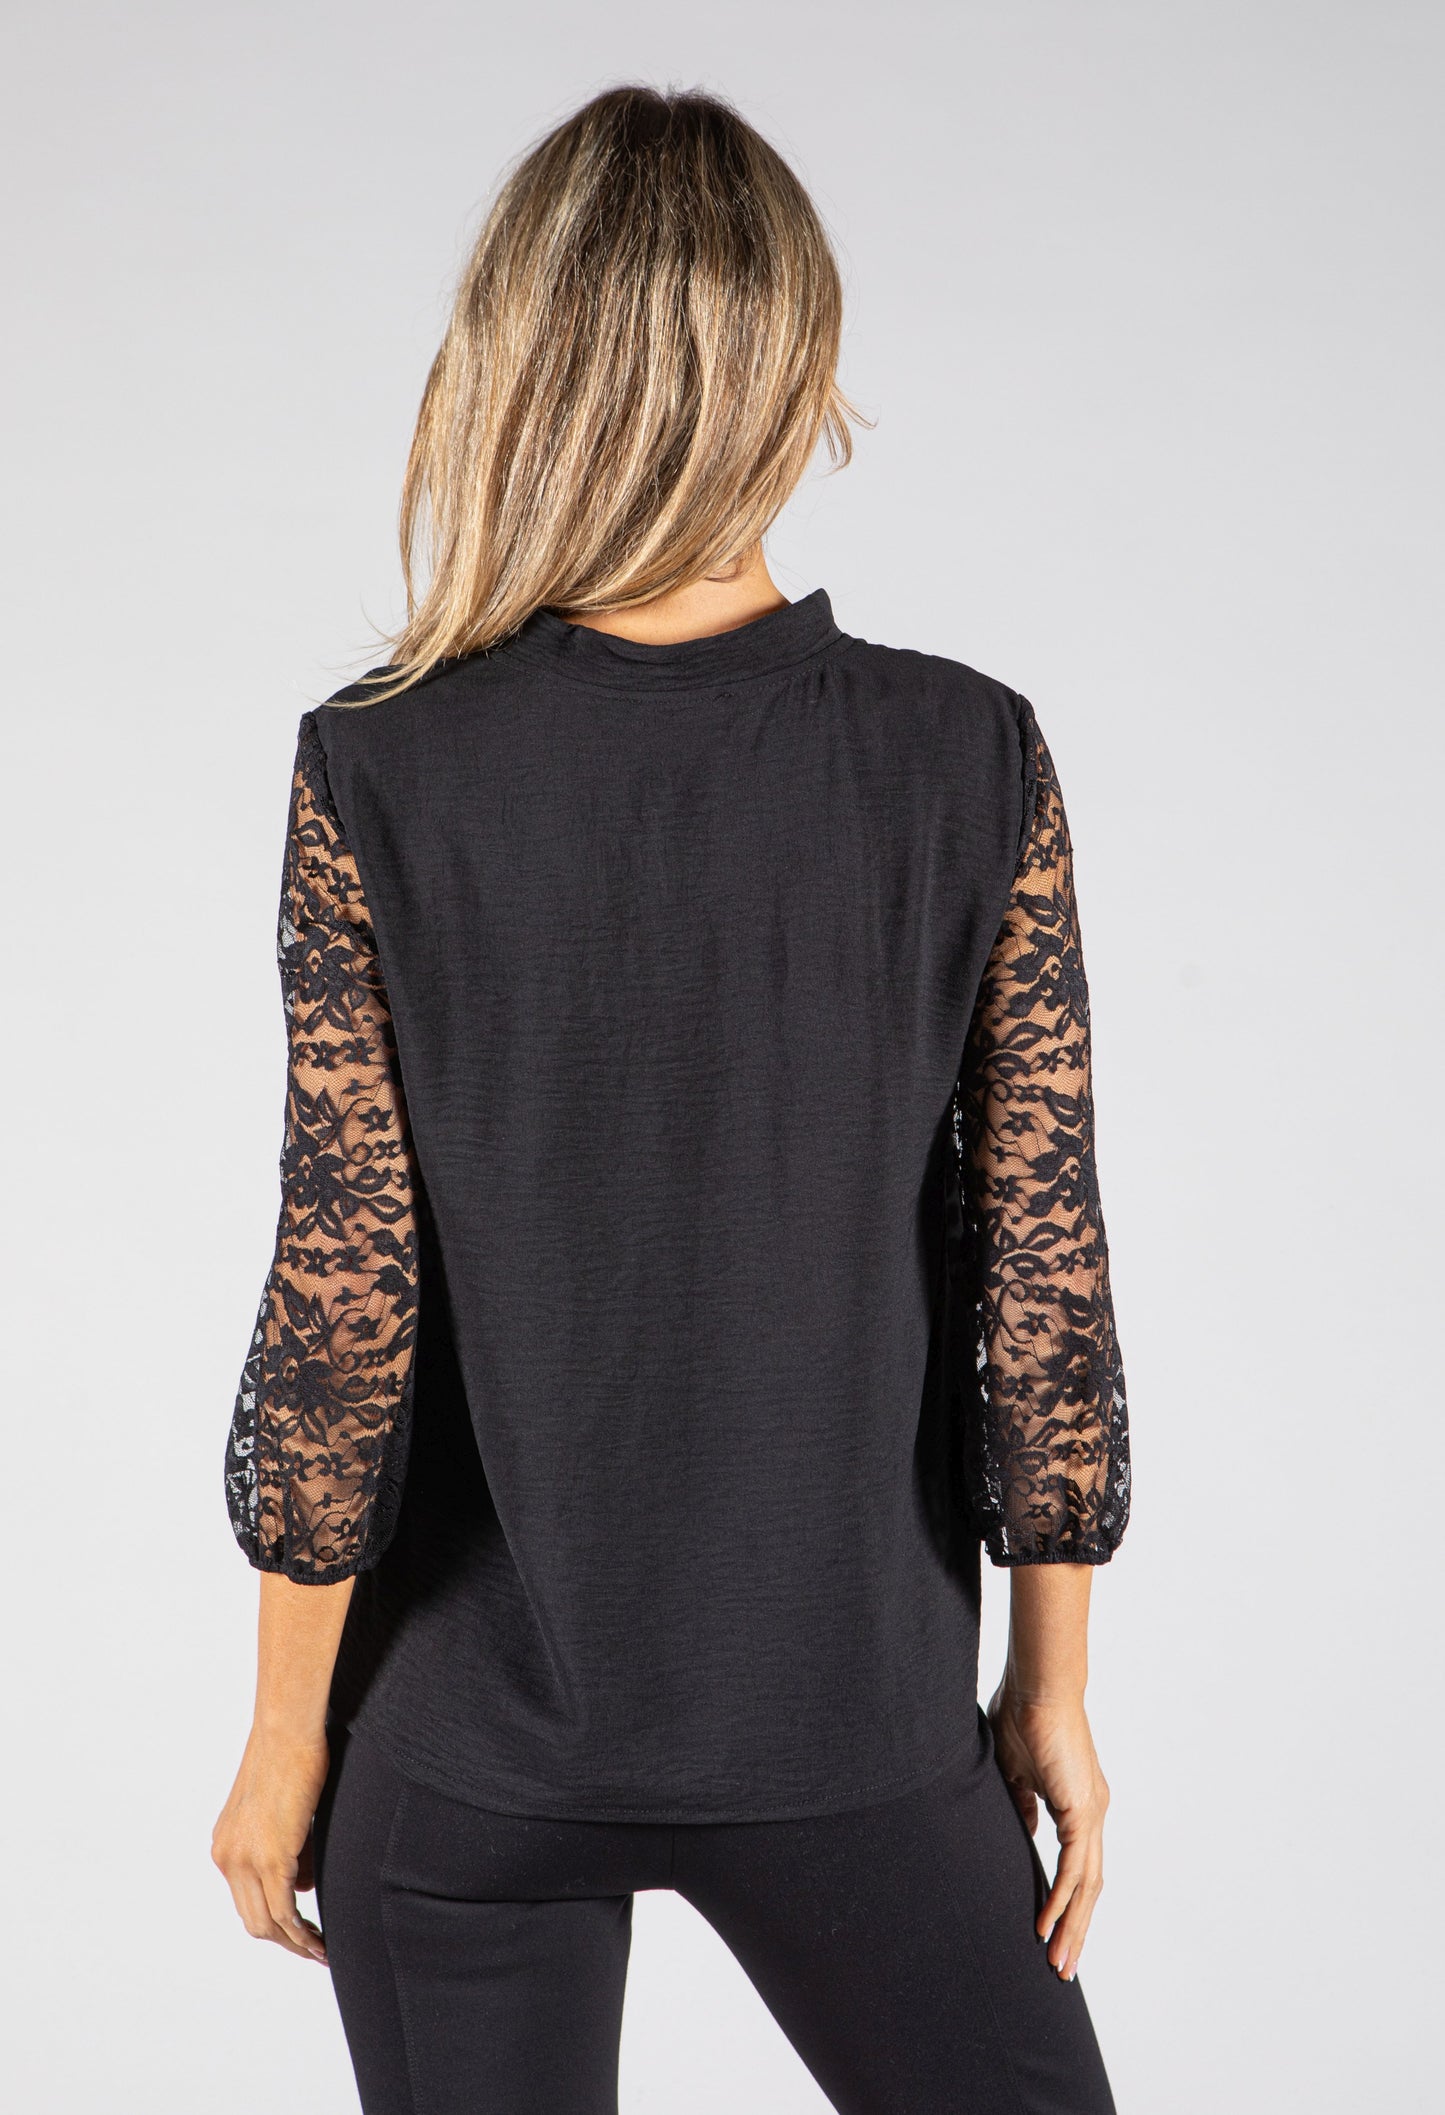 Lace Sleeve Blouse